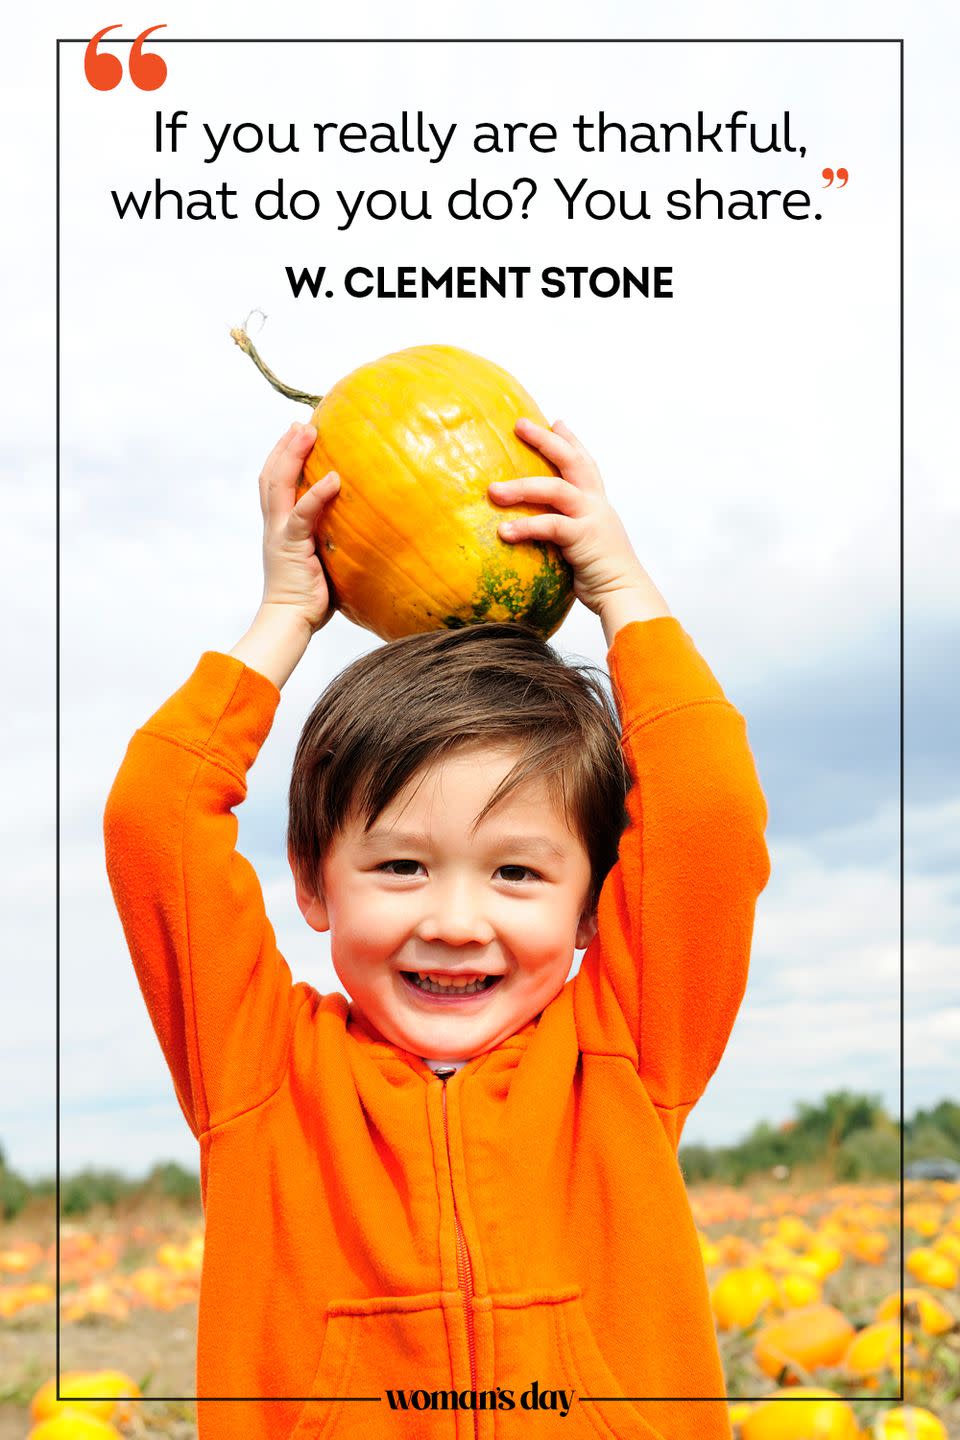 38) W. Clement Stone